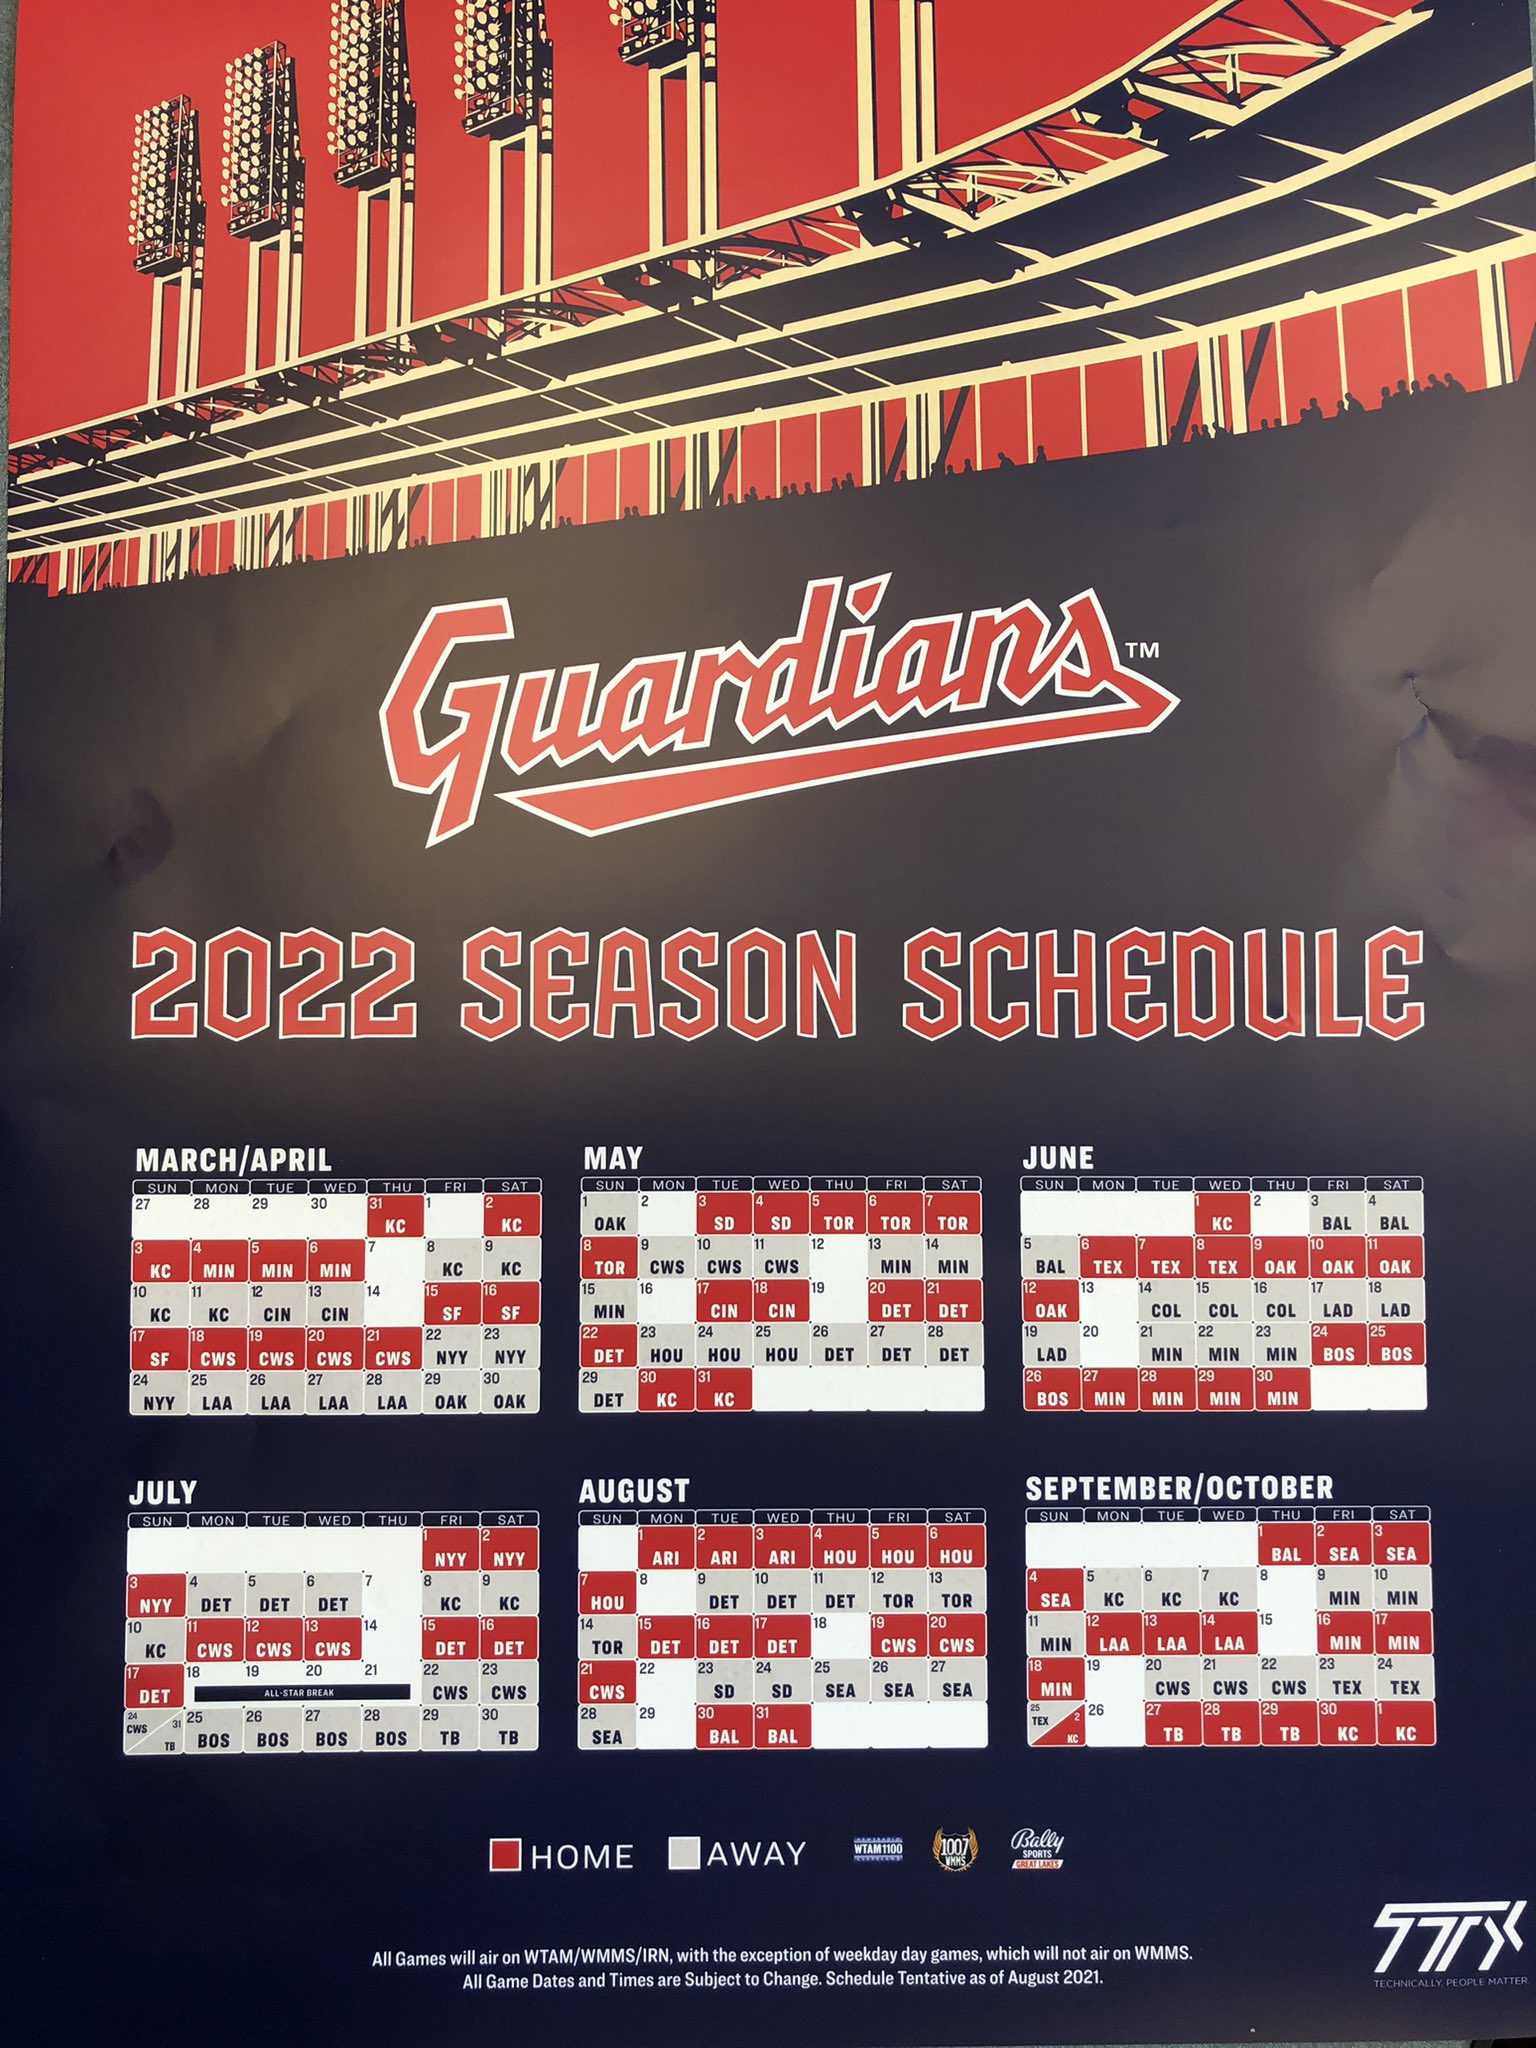 on Twitter "A look at the 2022 Cleveland Guardians